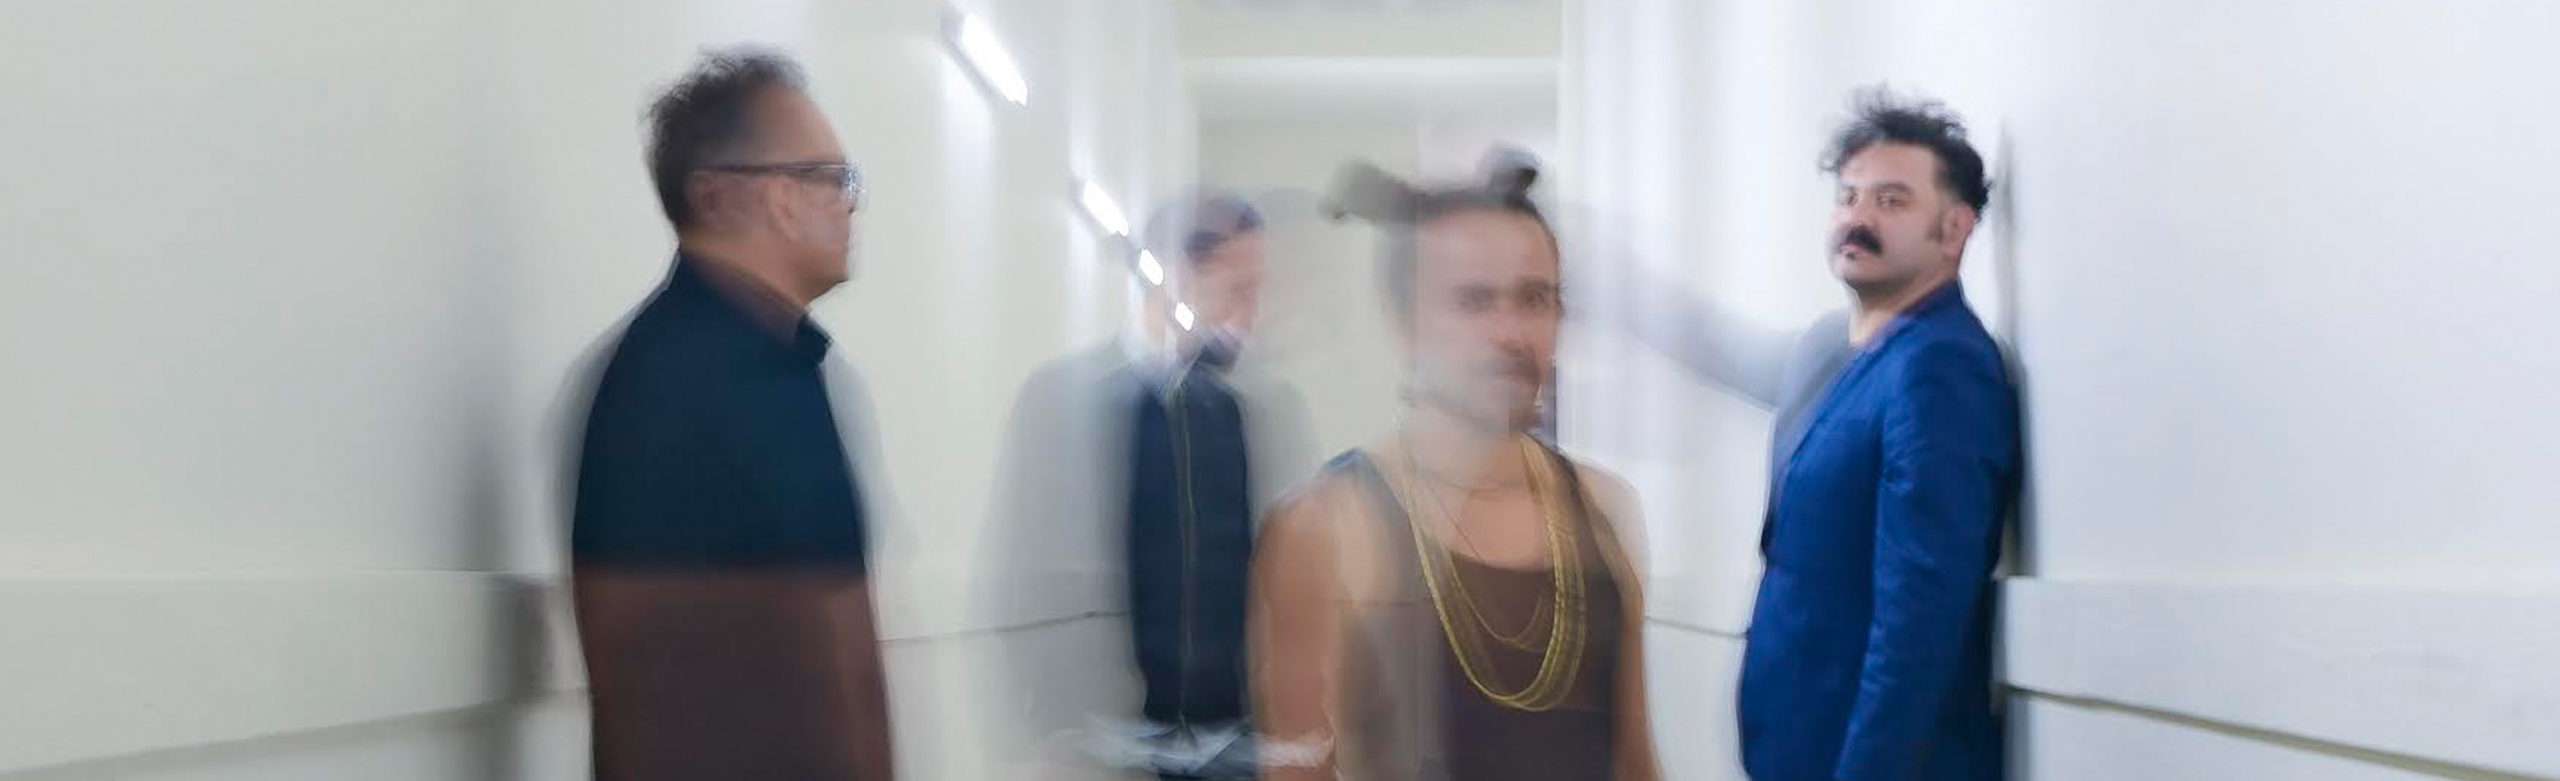 Café Tacvba Tickets + Merchandise Package Giveaway Image